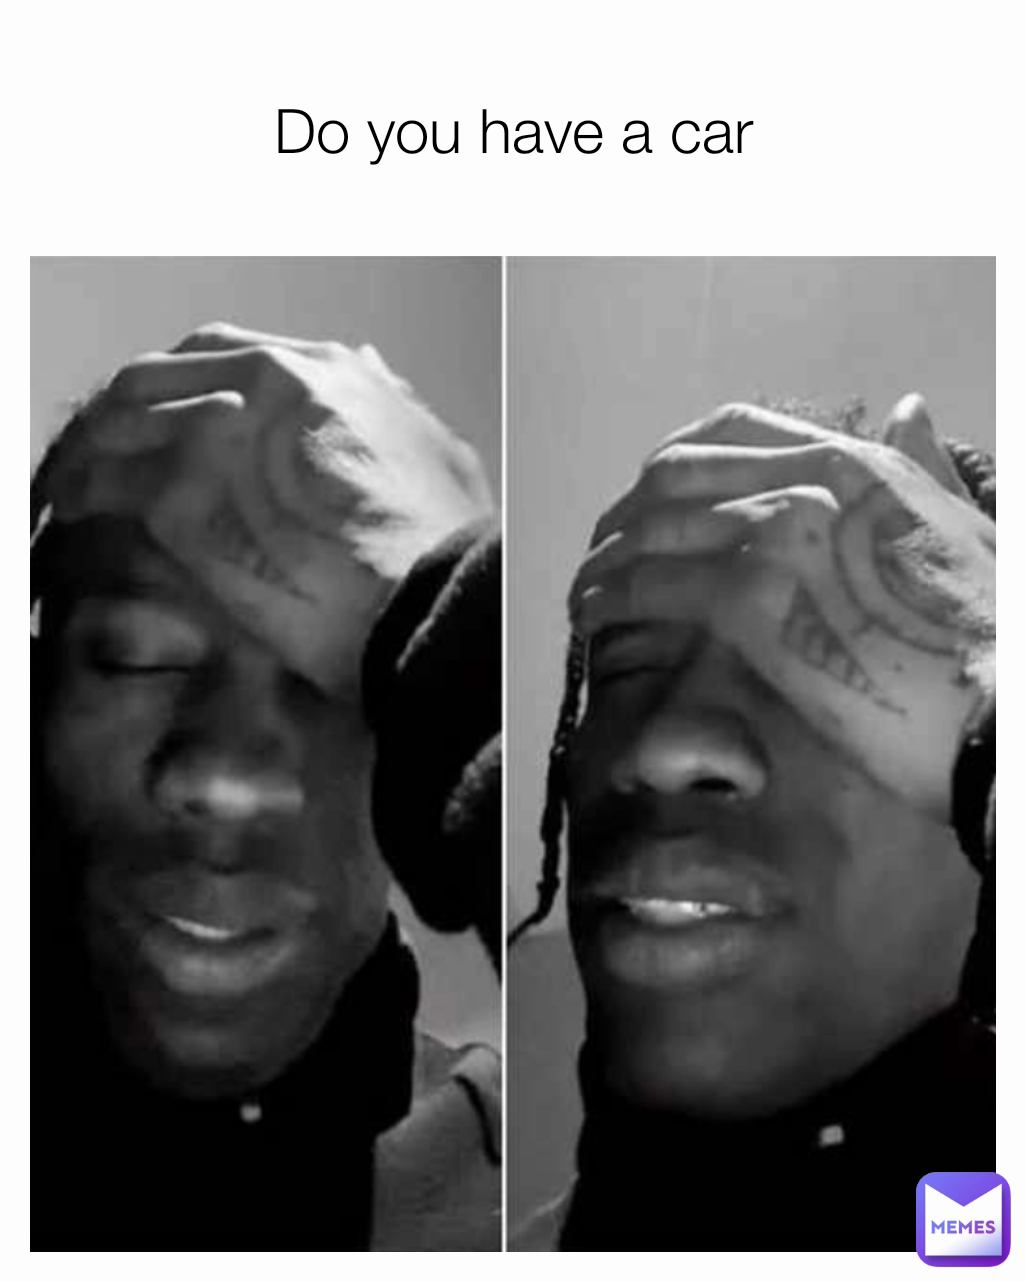 Do you have a car